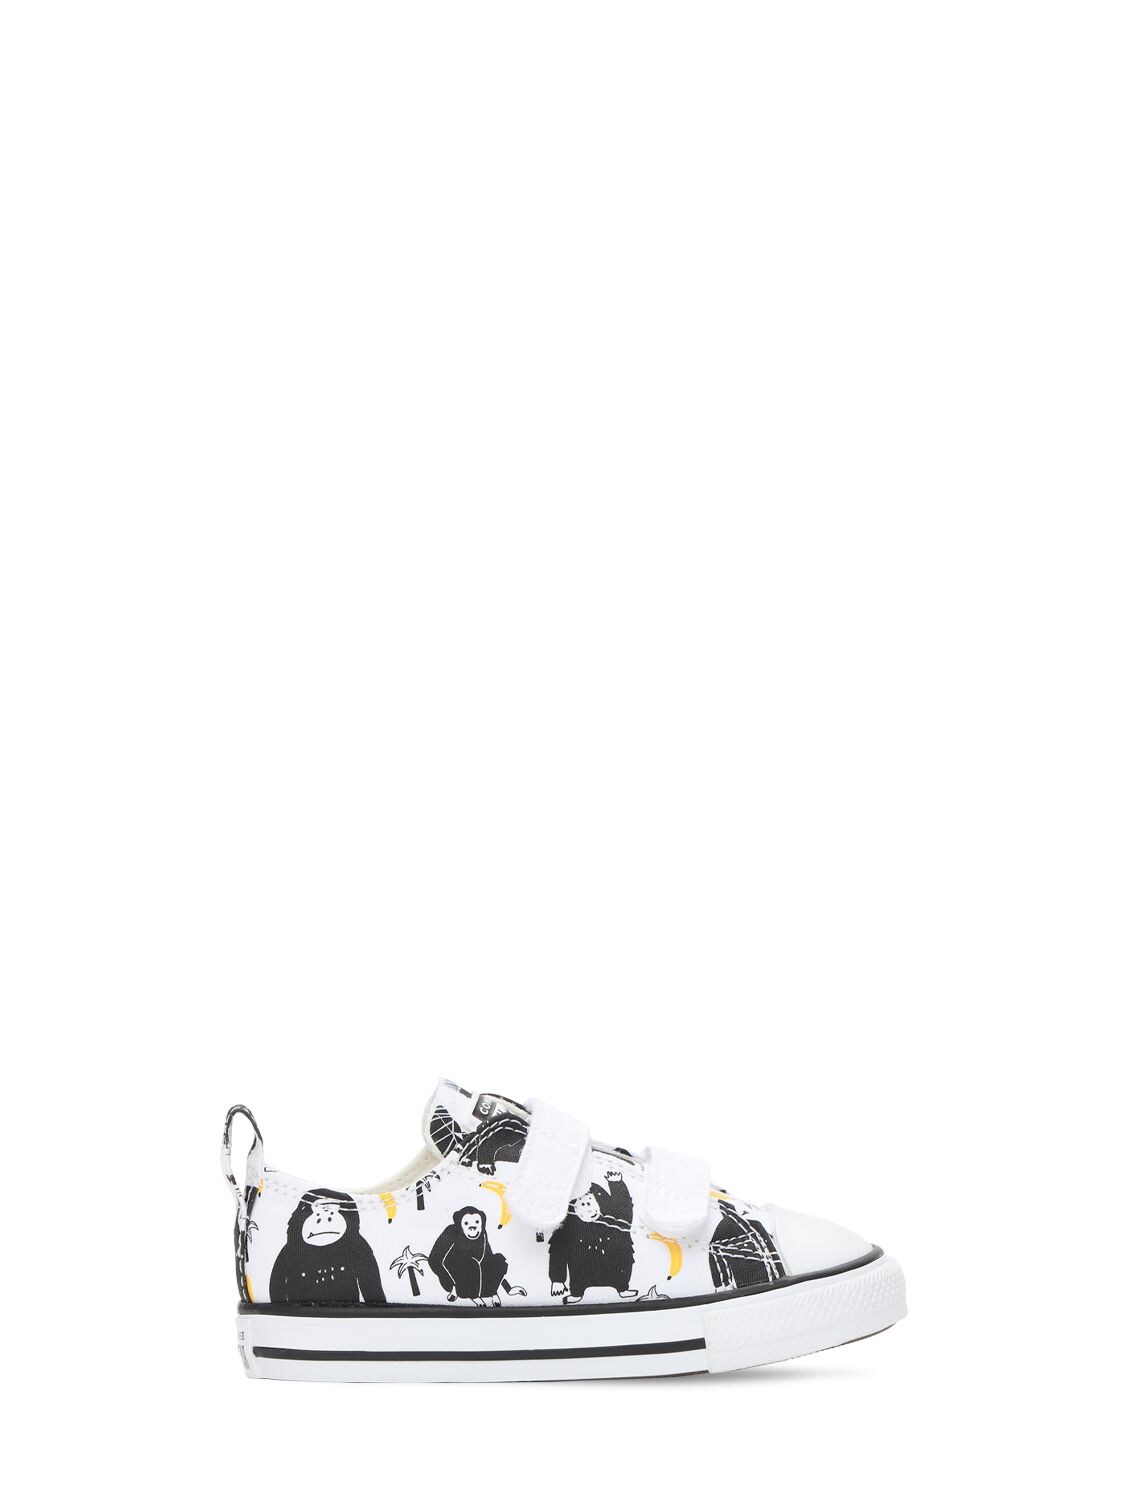 Image of Chimpanzee Print Chuck Taylor Sneakers